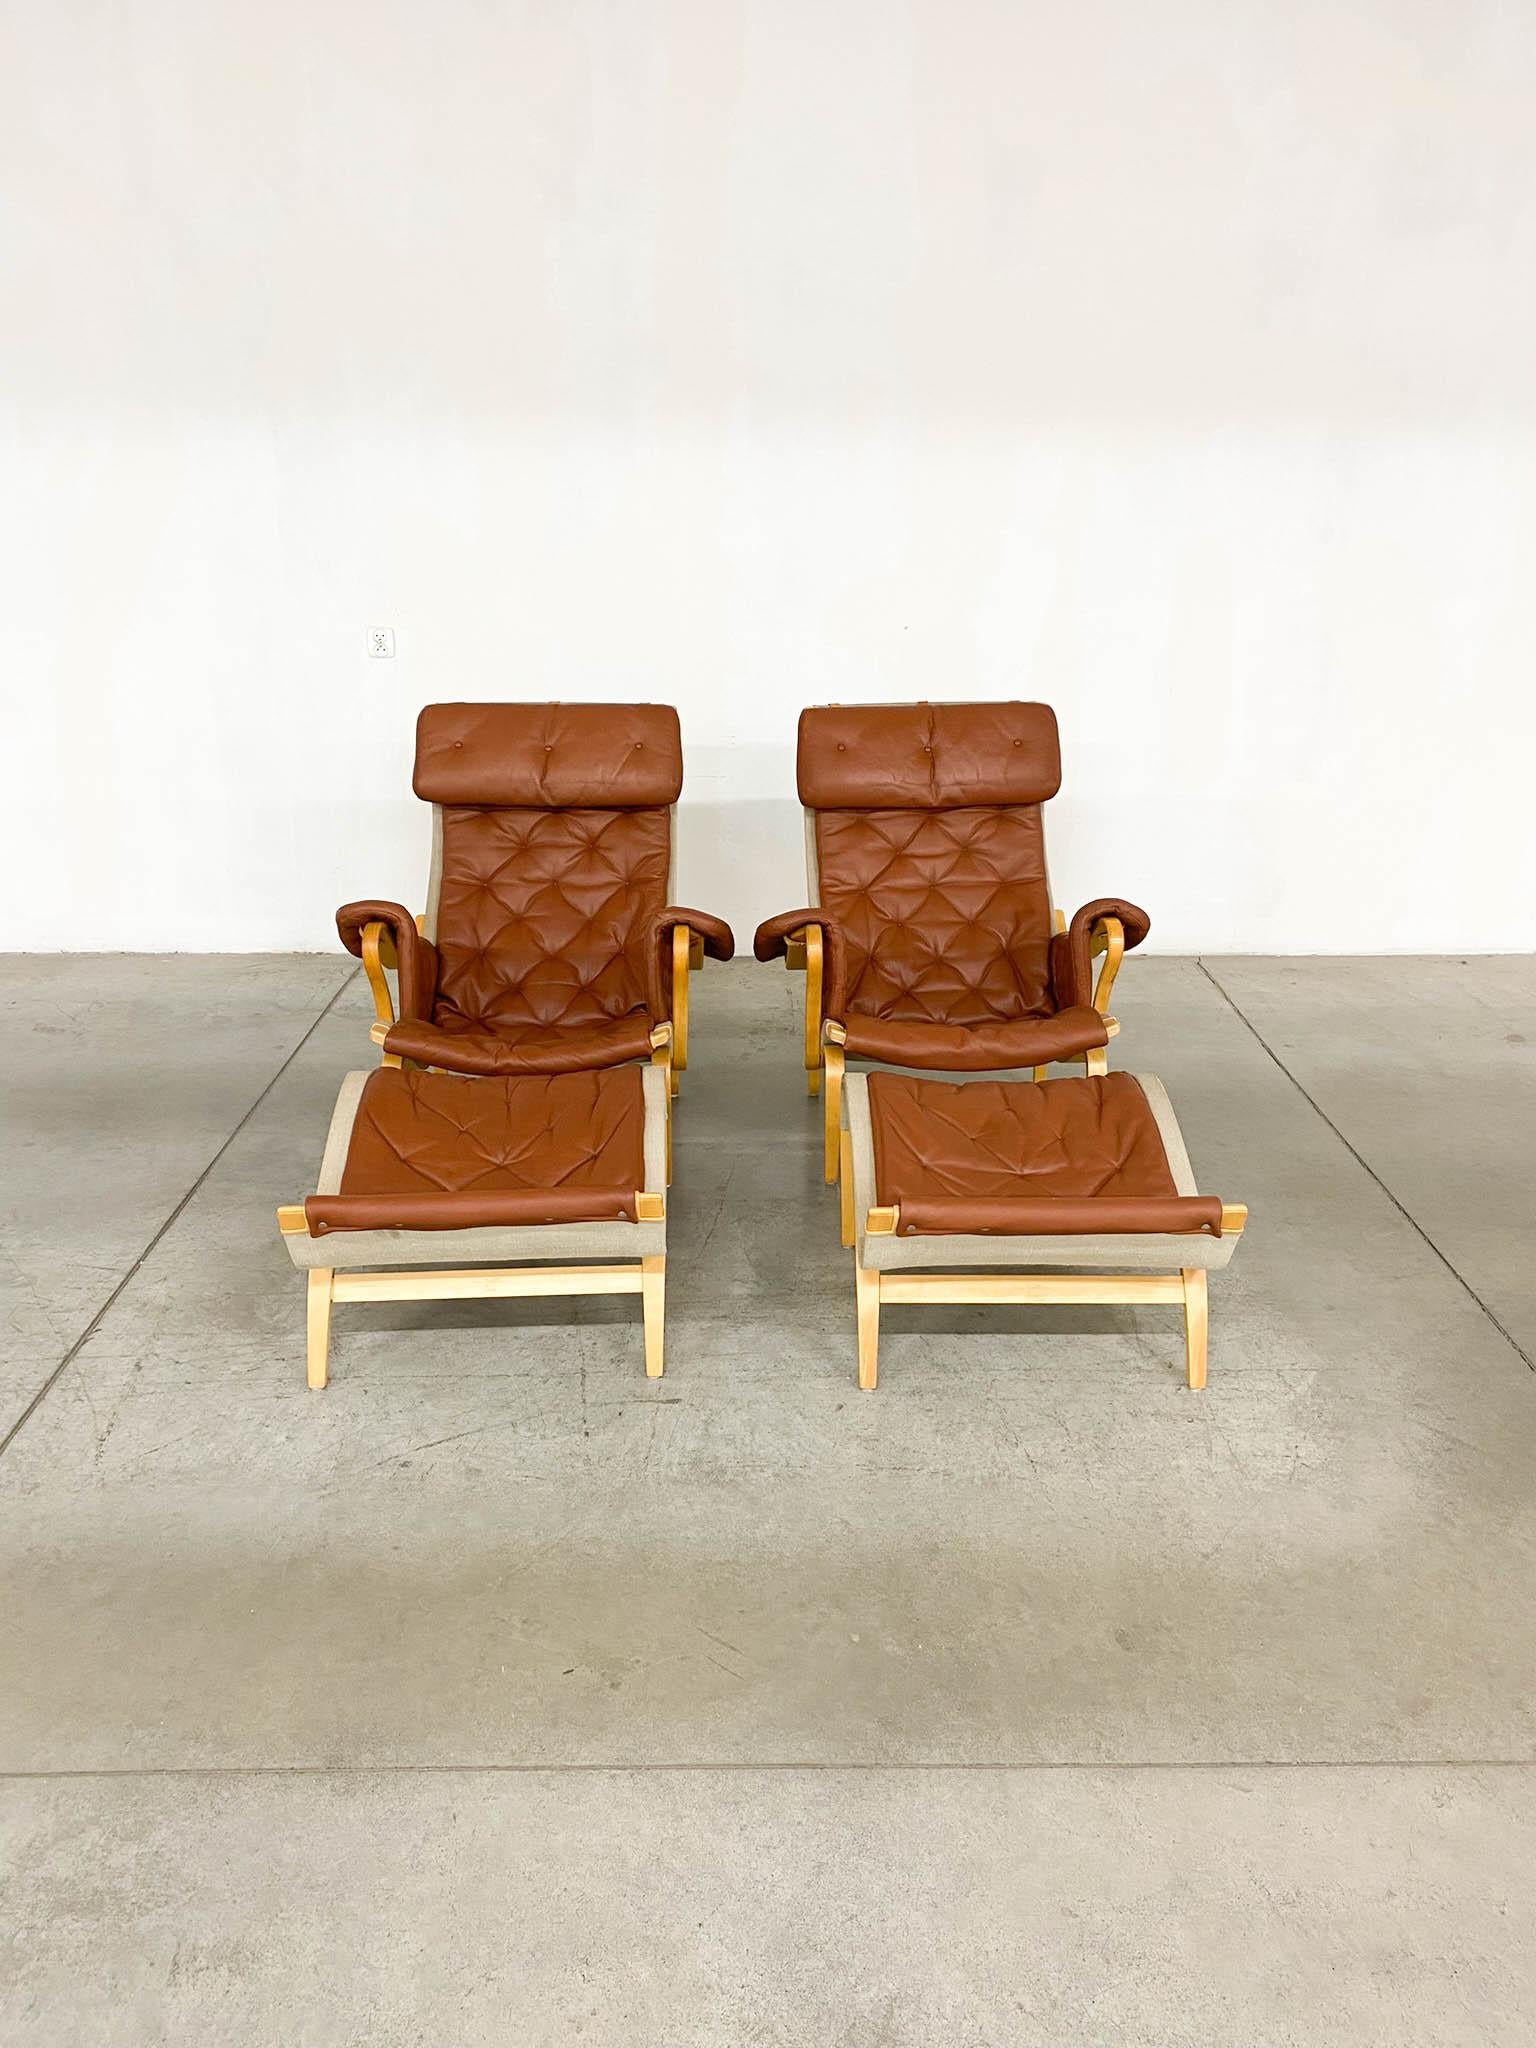 Pernilla 69 Lounge Chair with Ottoman by Bruno Mathsson for Dux, 1990s, Set of 4 For Sale 1